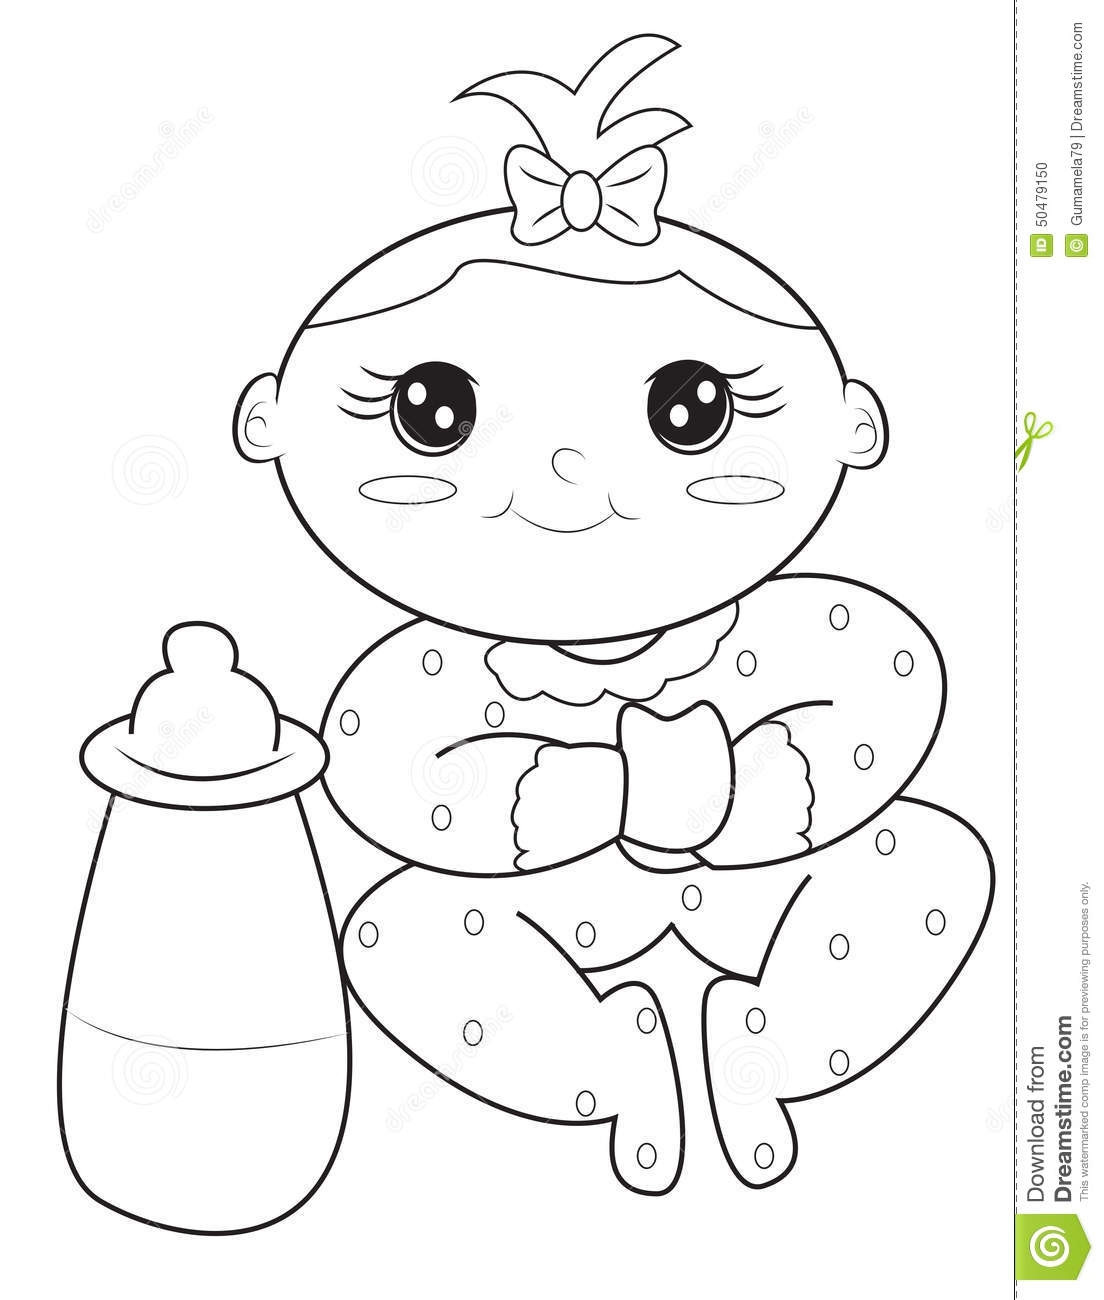 the-top-21-ideas-about-baby-doll-coloring-pages-home-family-style